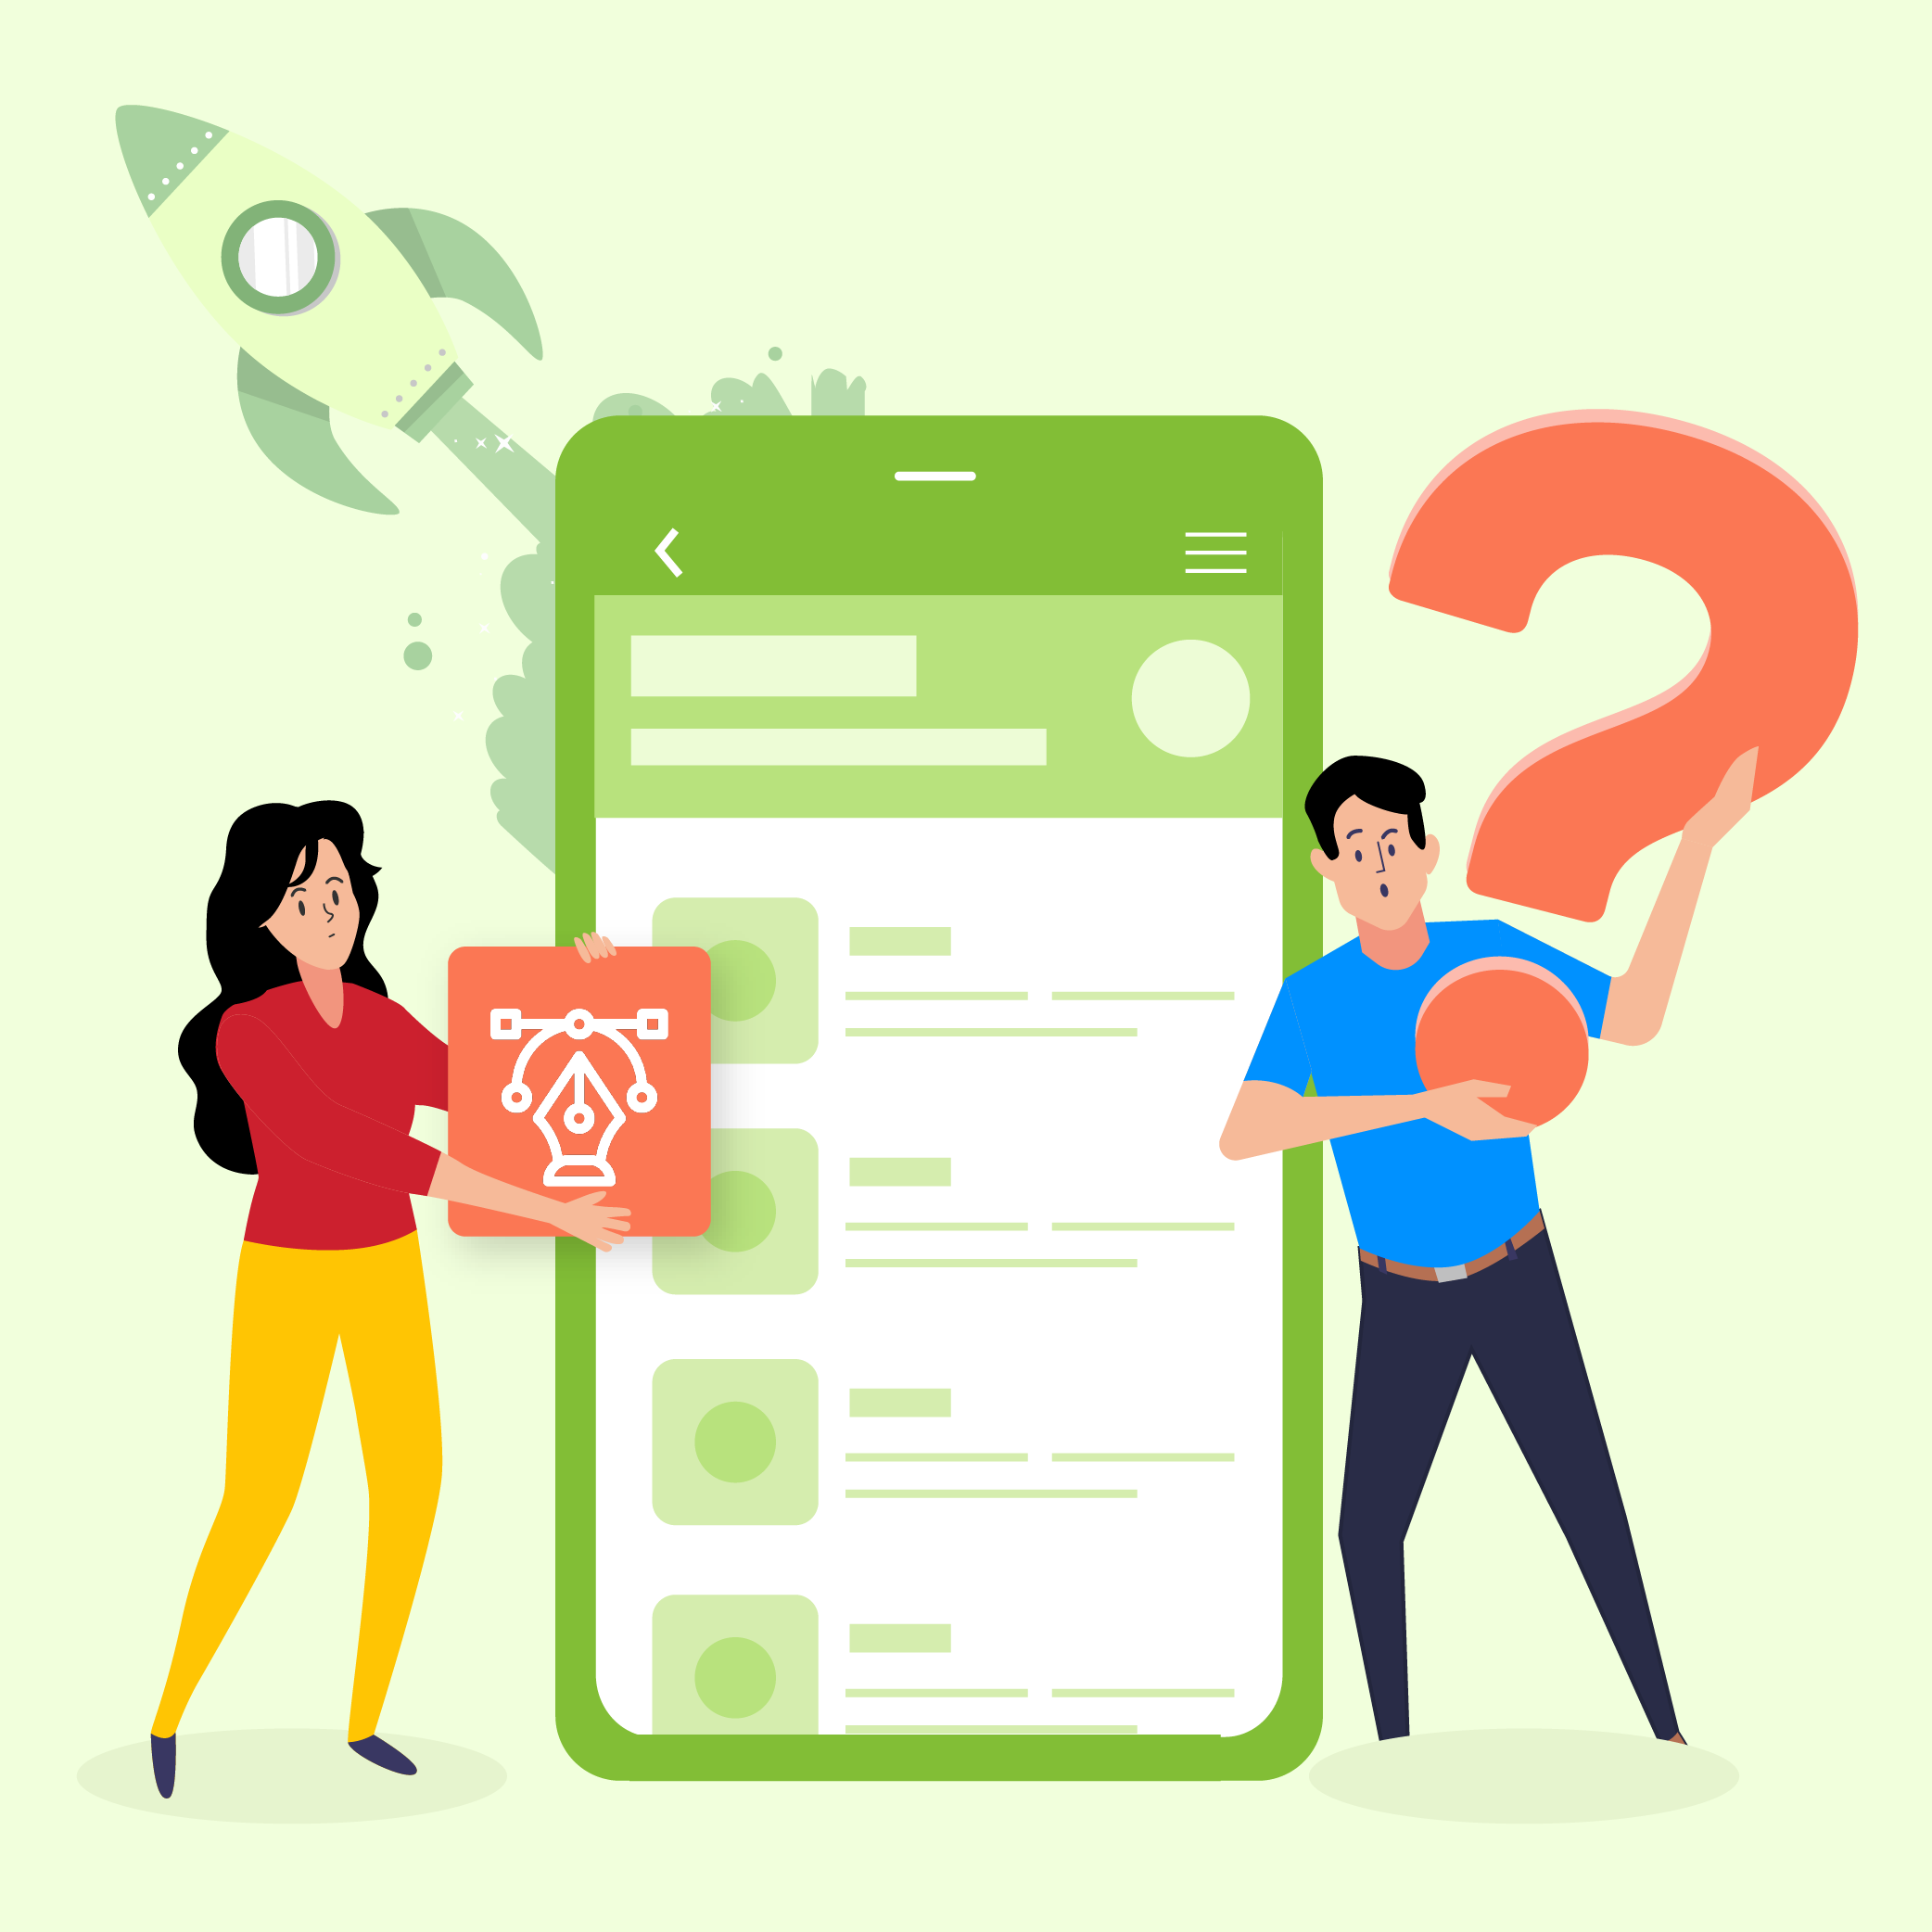 Important Questions for Startups for Building an App